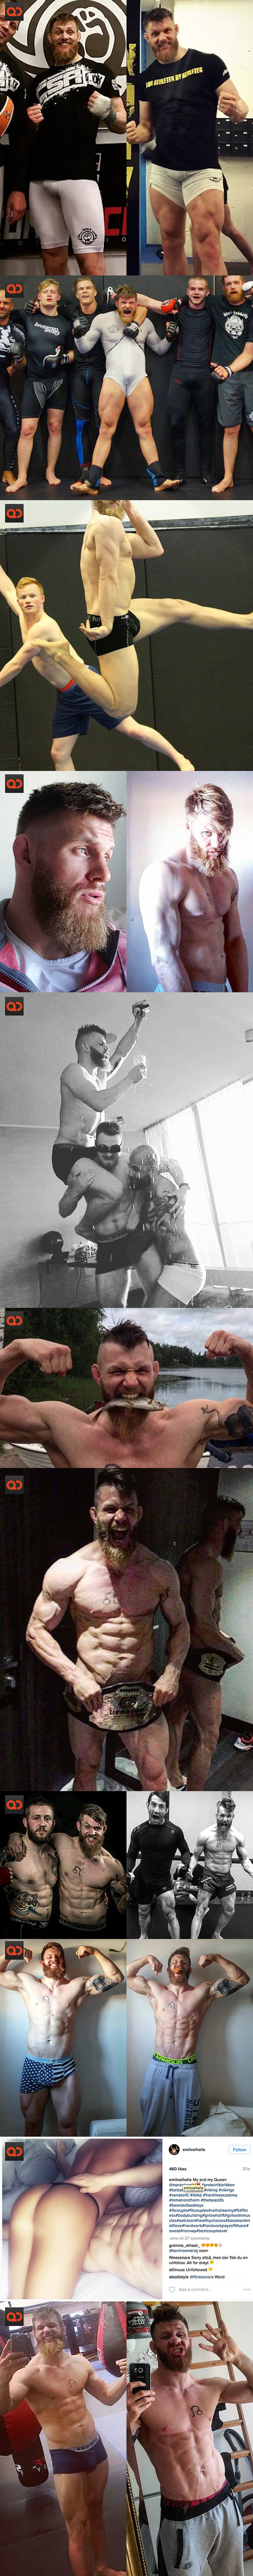 Emil “Valhalla” Meek, Norwegian MMA Fighter, Gets His Peen And Butt Exposed!